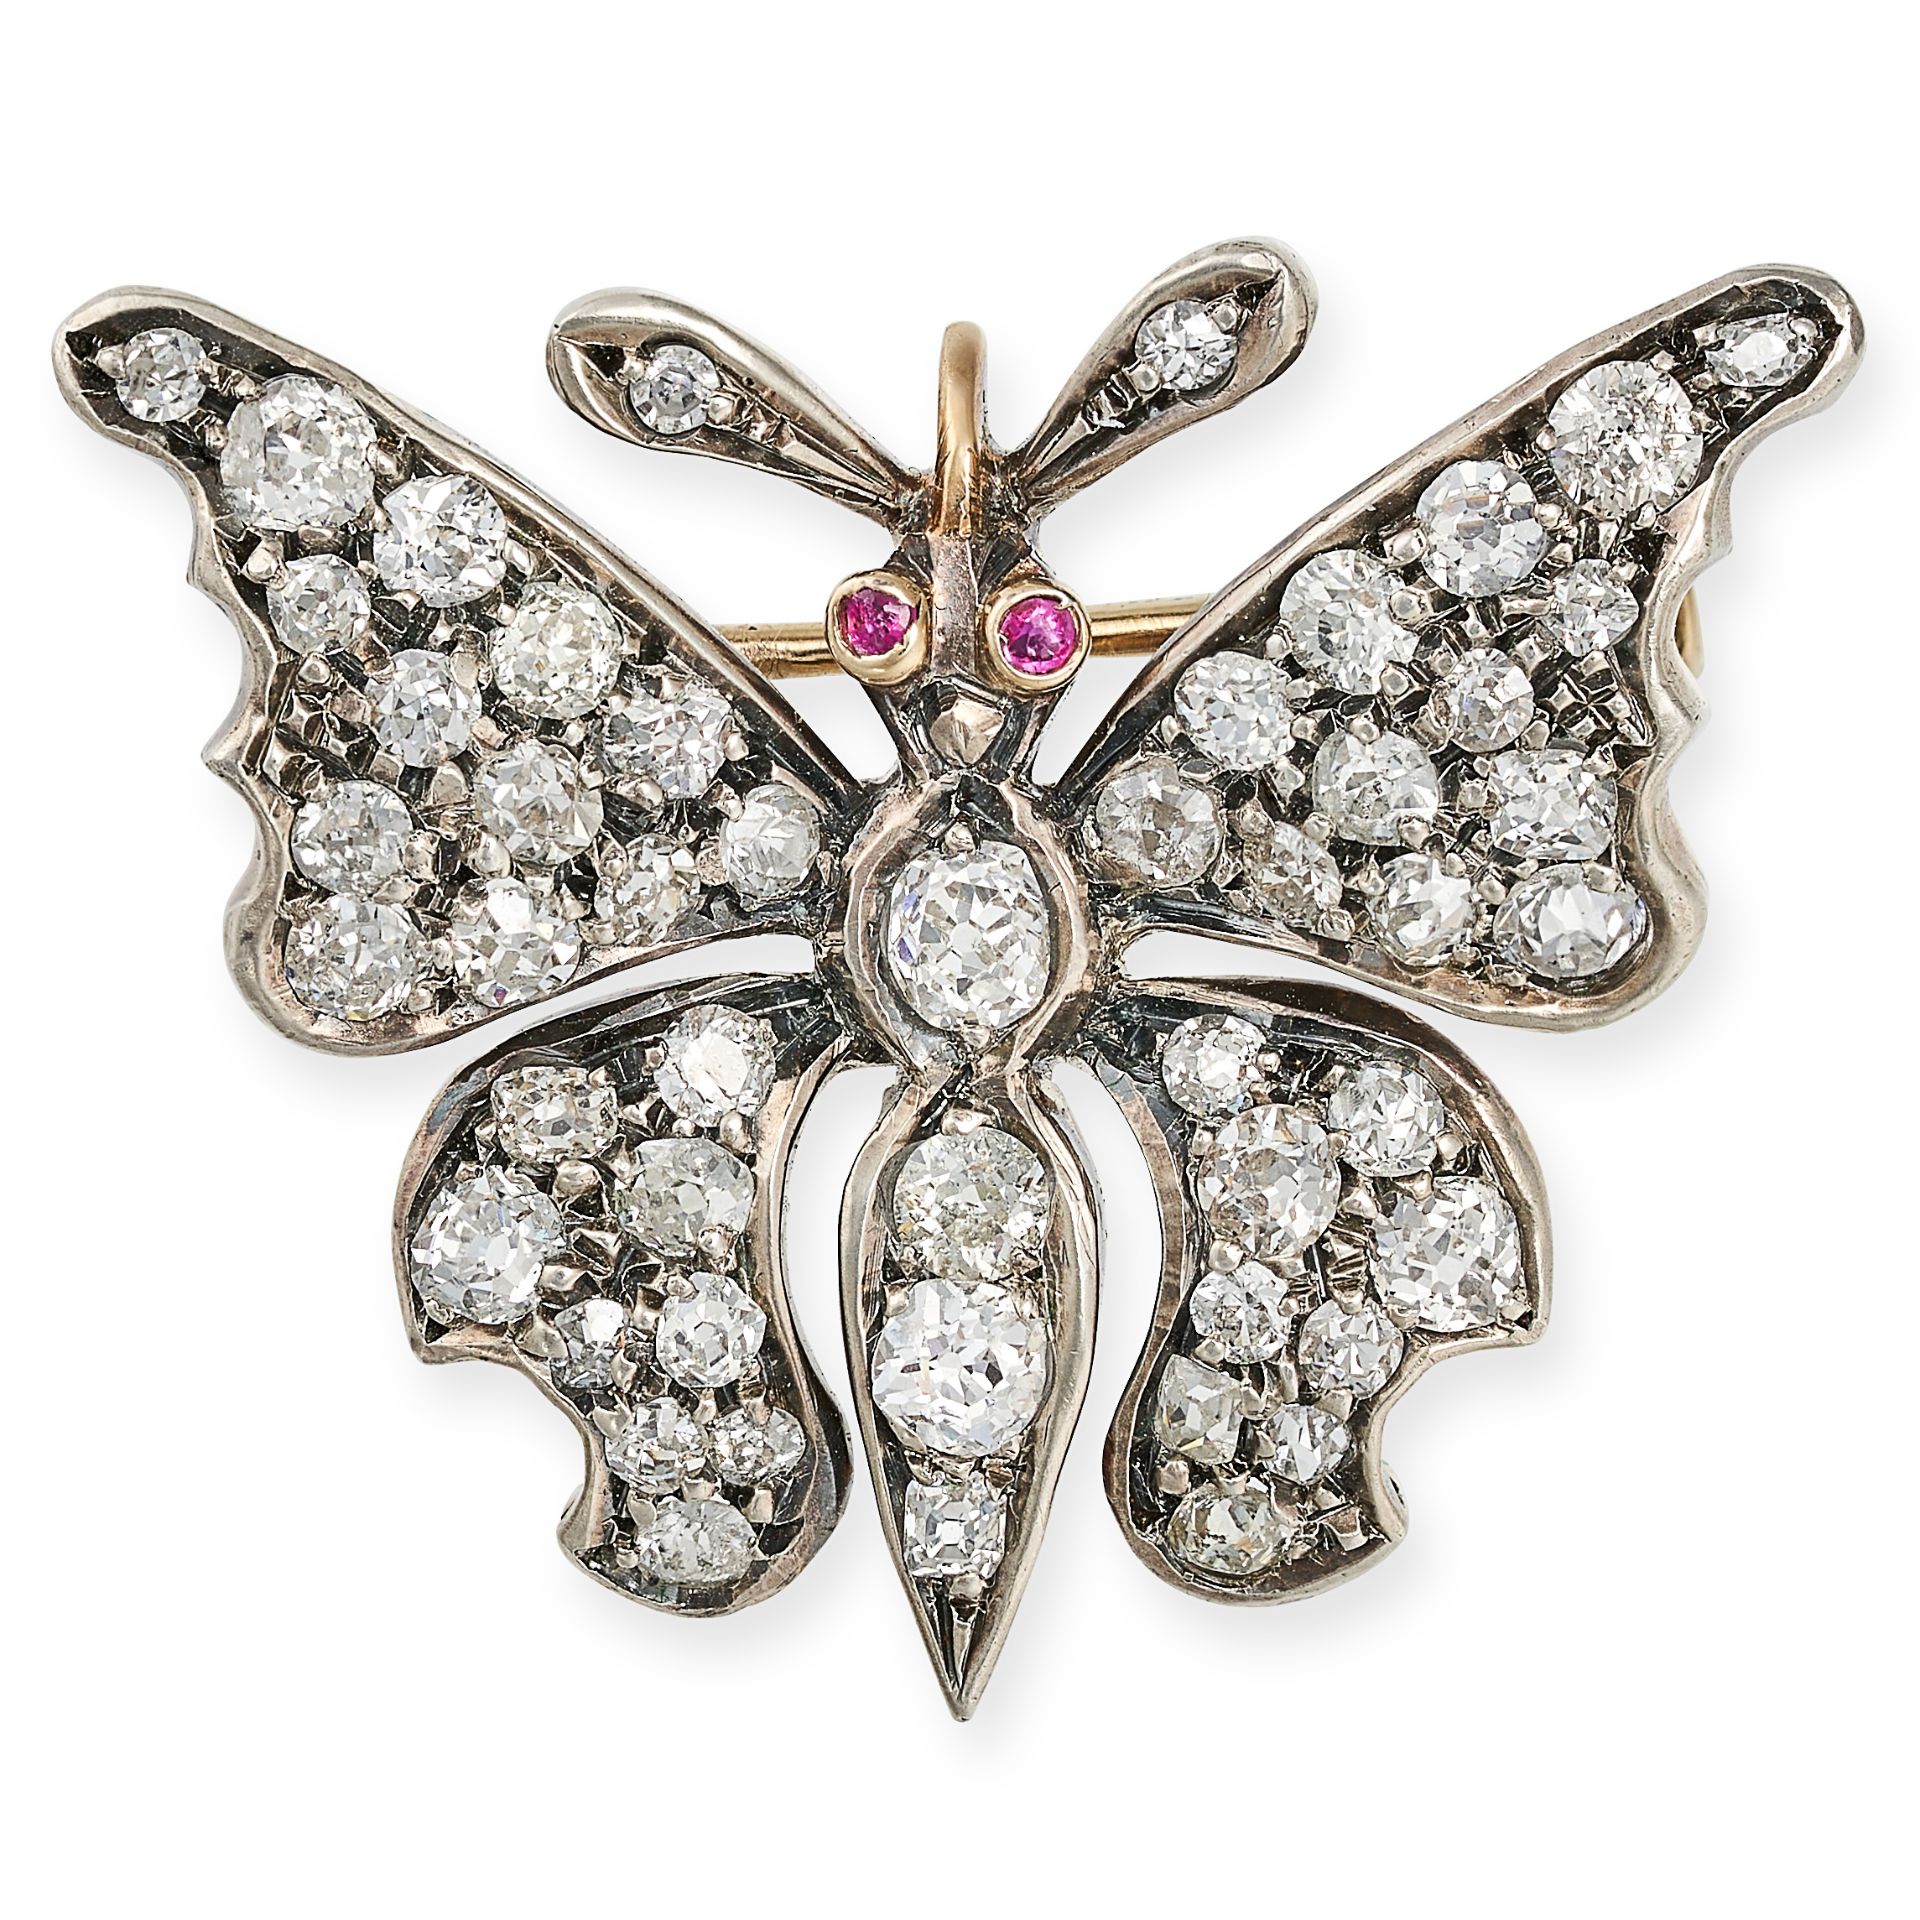 A FINE ANTIQUE DIAMOND AND RUBY BUTTERFLY BROOCH, 19TH CENTURY in yellow gold and silver, designe...